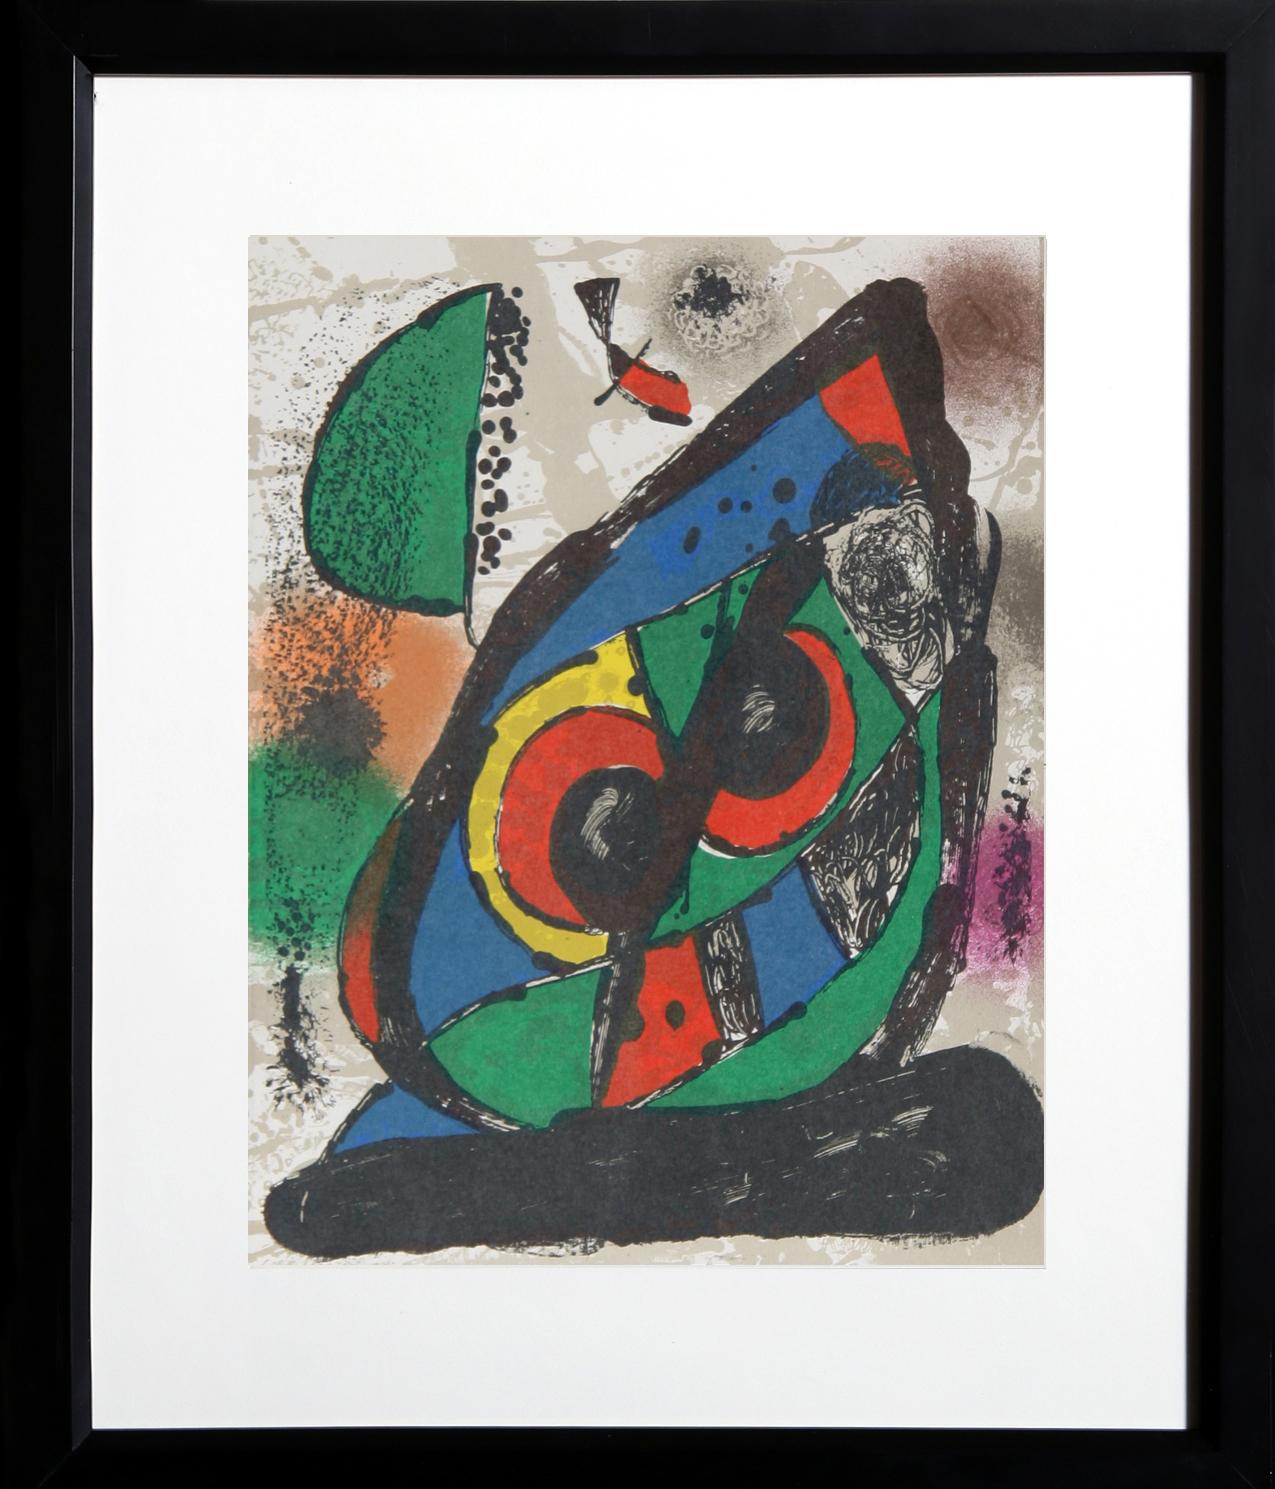 Joan Miro is known for his abstract, expressive, and child-like Modern style. Original lithograph published in Miro Lithographe V Catalogue Raisonne. Nicely framed.

Lithograph V (1256)
Joan Miro, Spanish (1893–1983)
Date: 1975
Lithograph
Size: 12 x